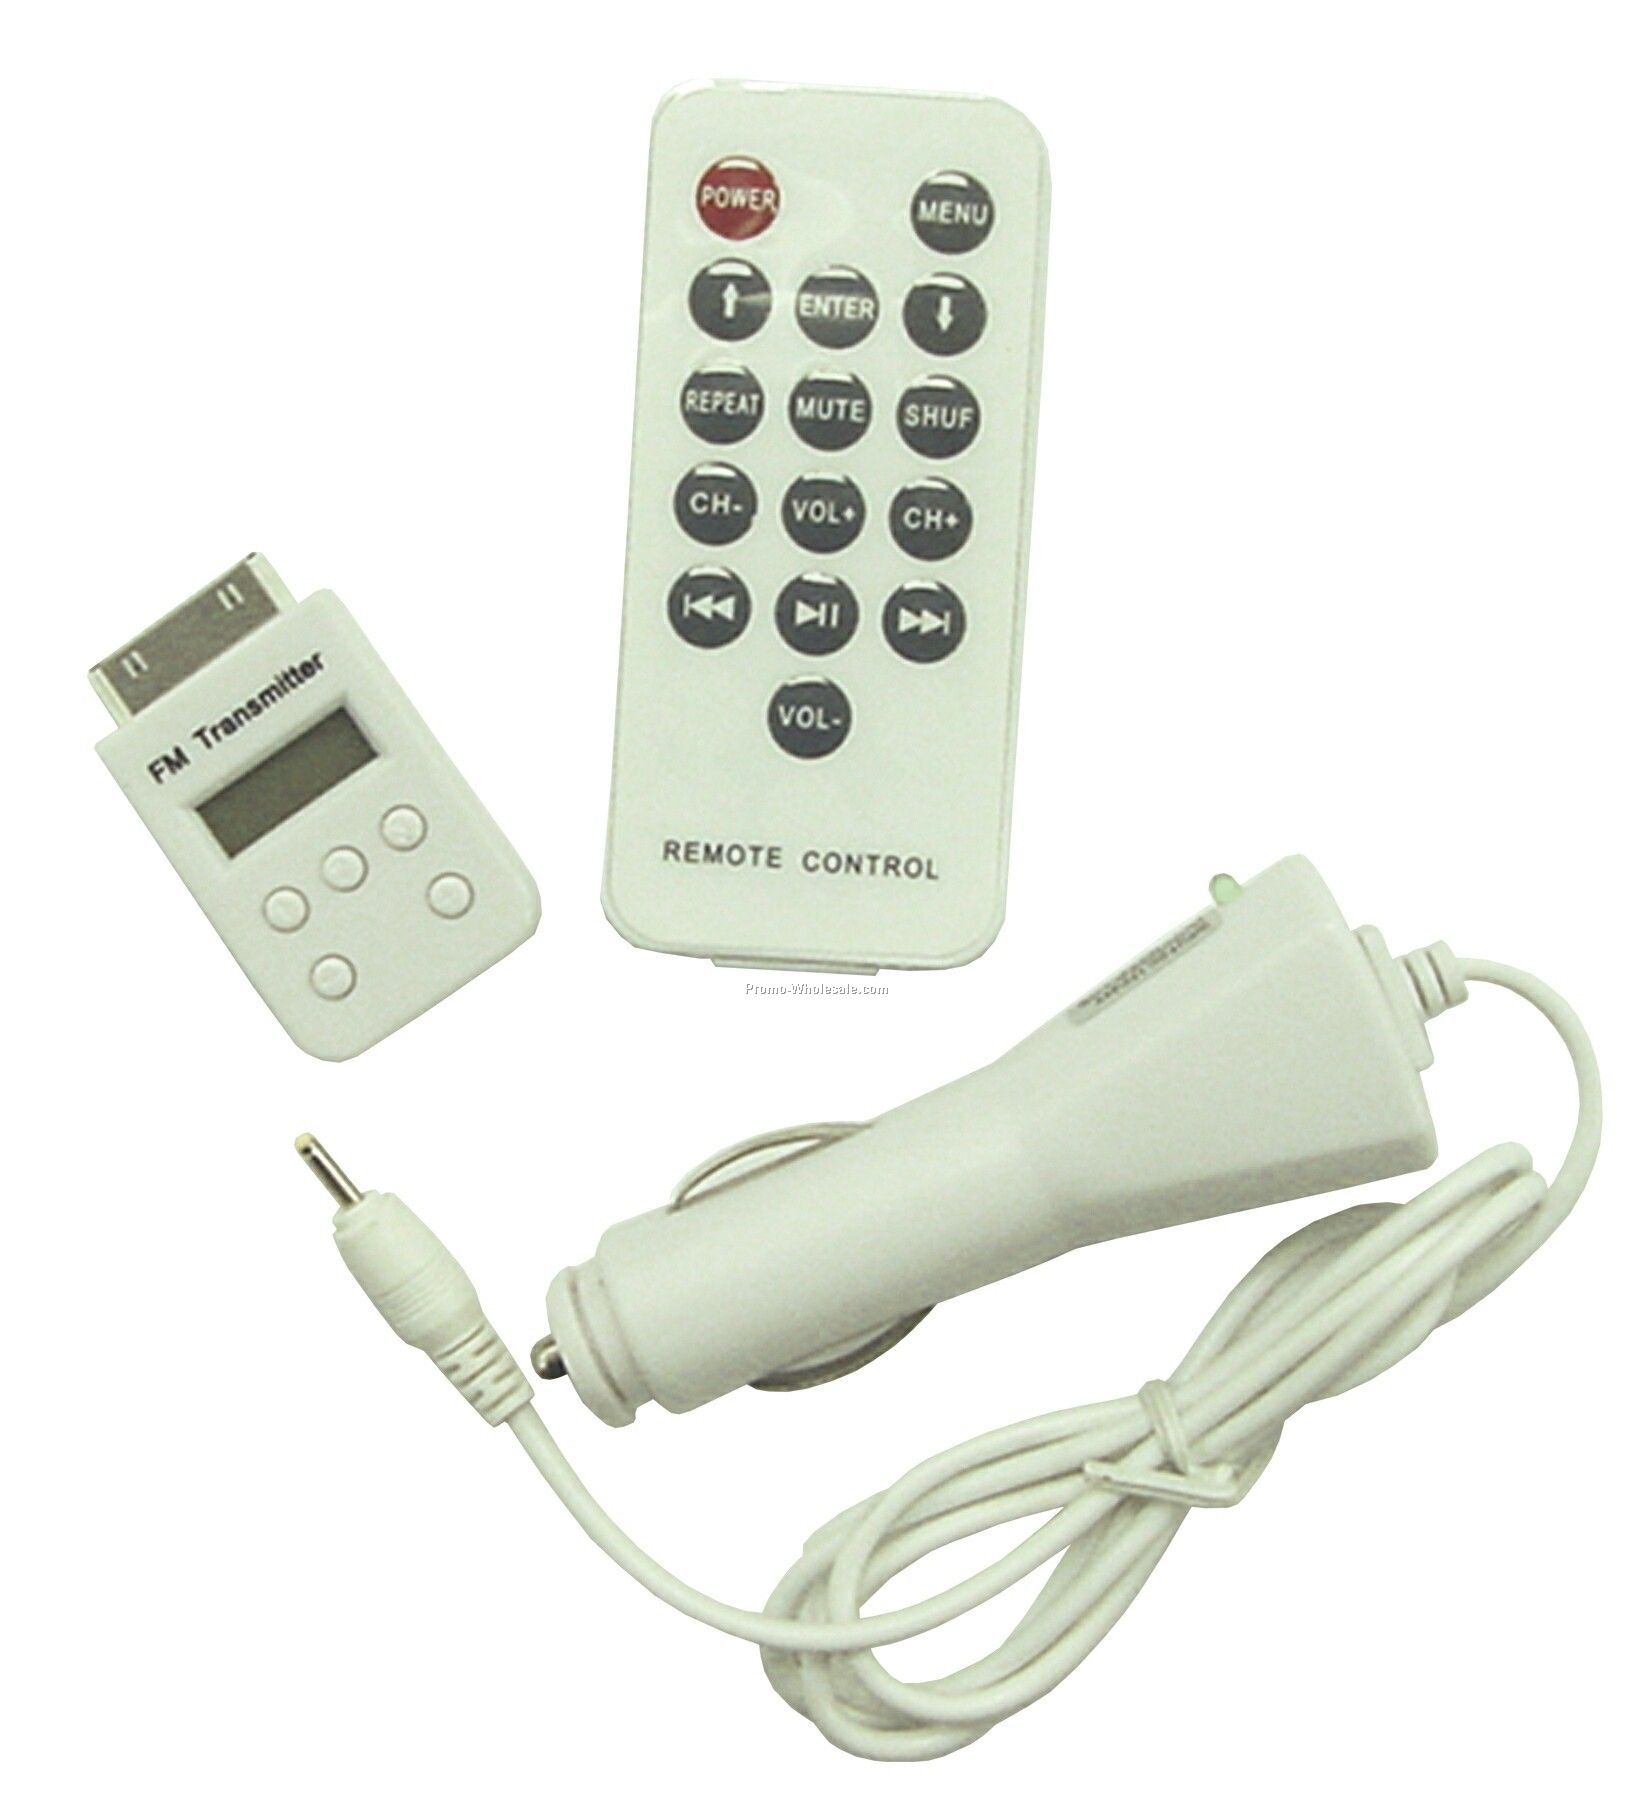 Wireless FM Transmitter For Iphone W/ Remote